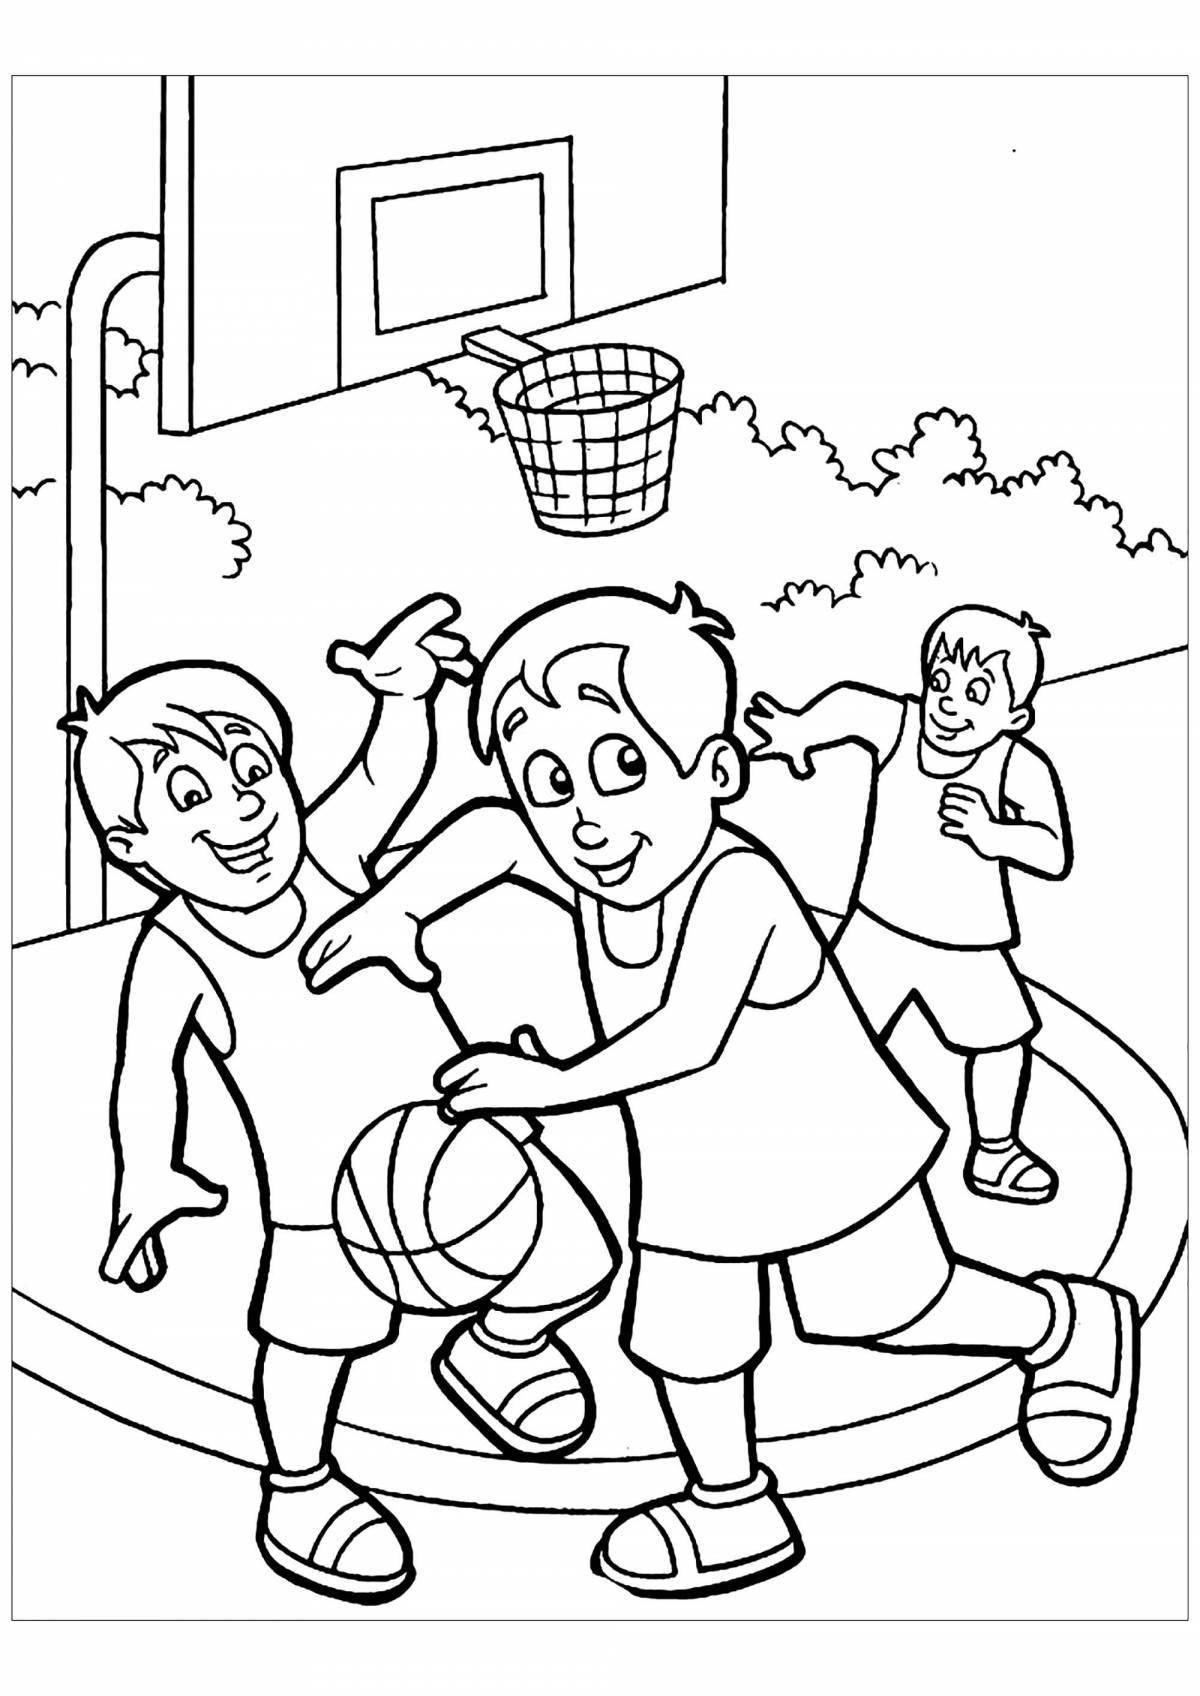 Physical education and sports for children #4